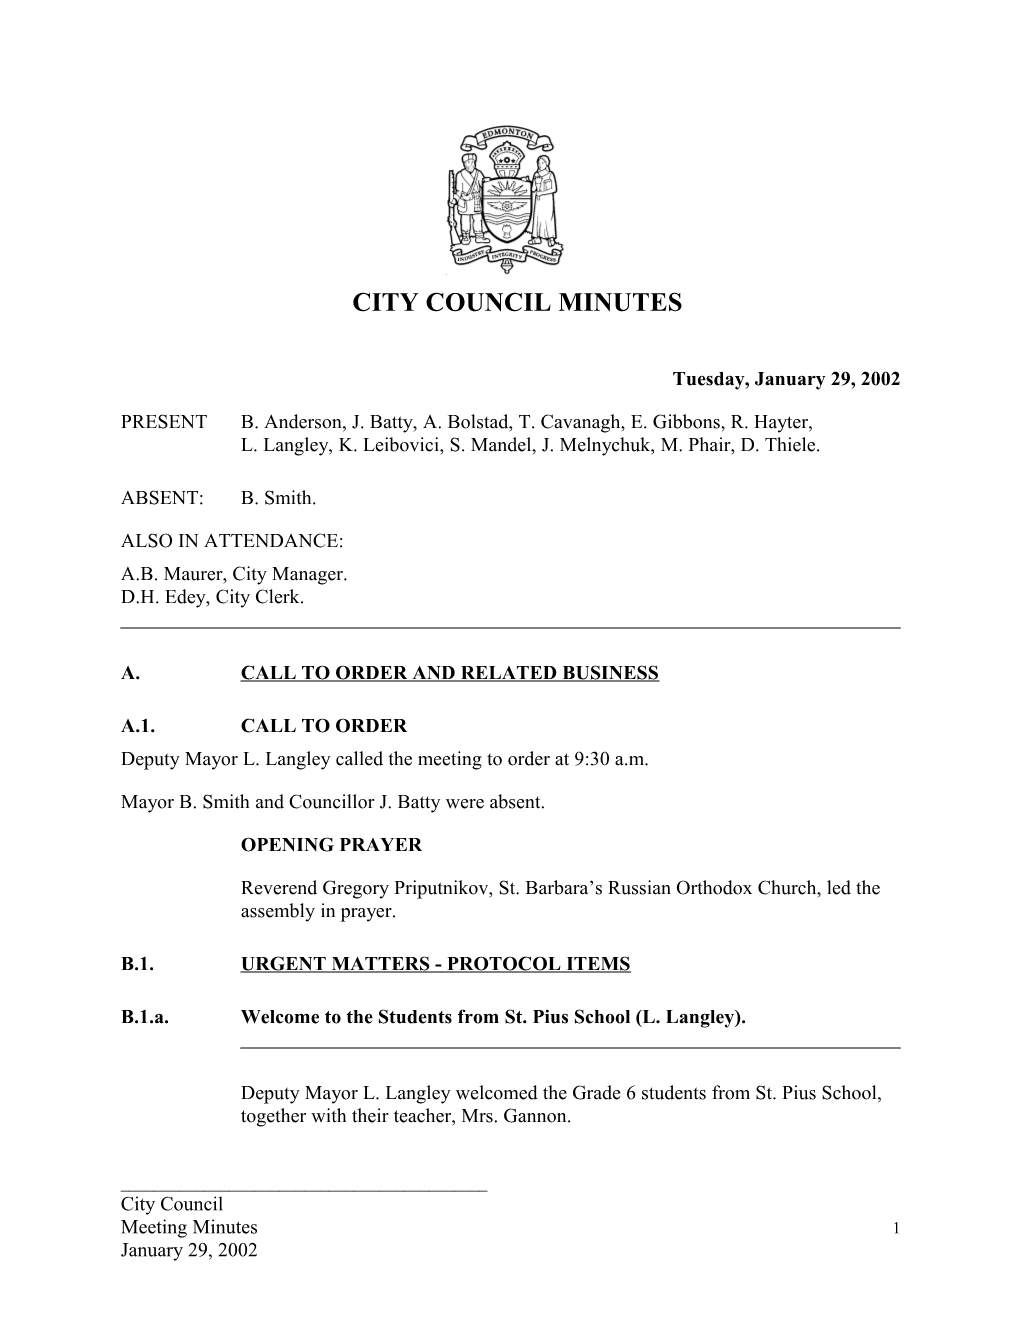 Minutes for City Council January 29, 2002 Meeting